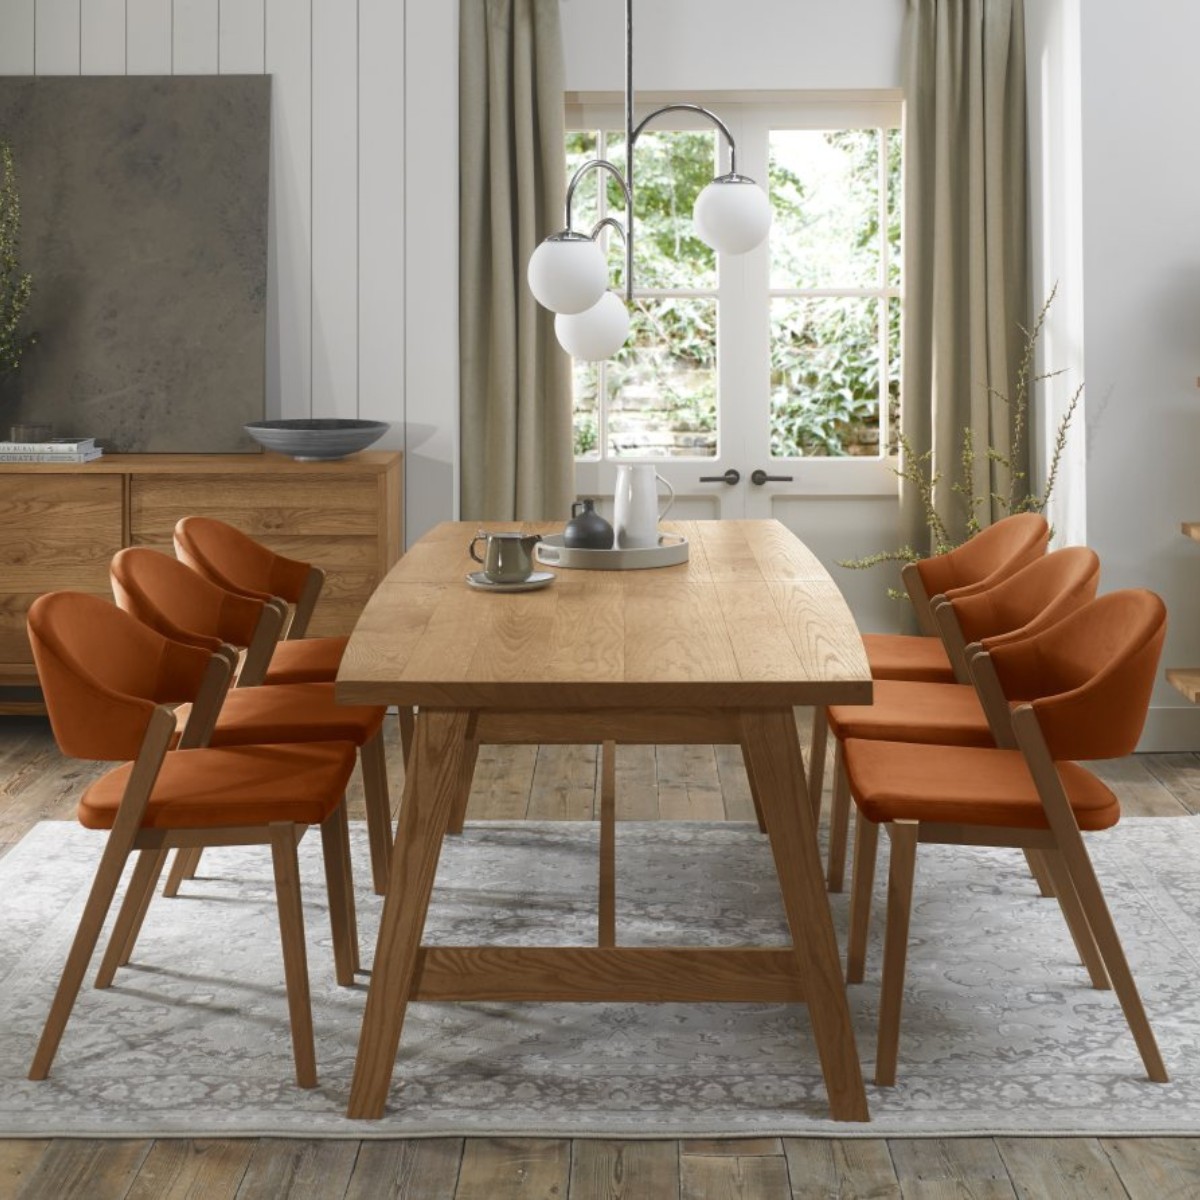 Chambery Rustic Oak Upholstered Dining Chair Orange - 6